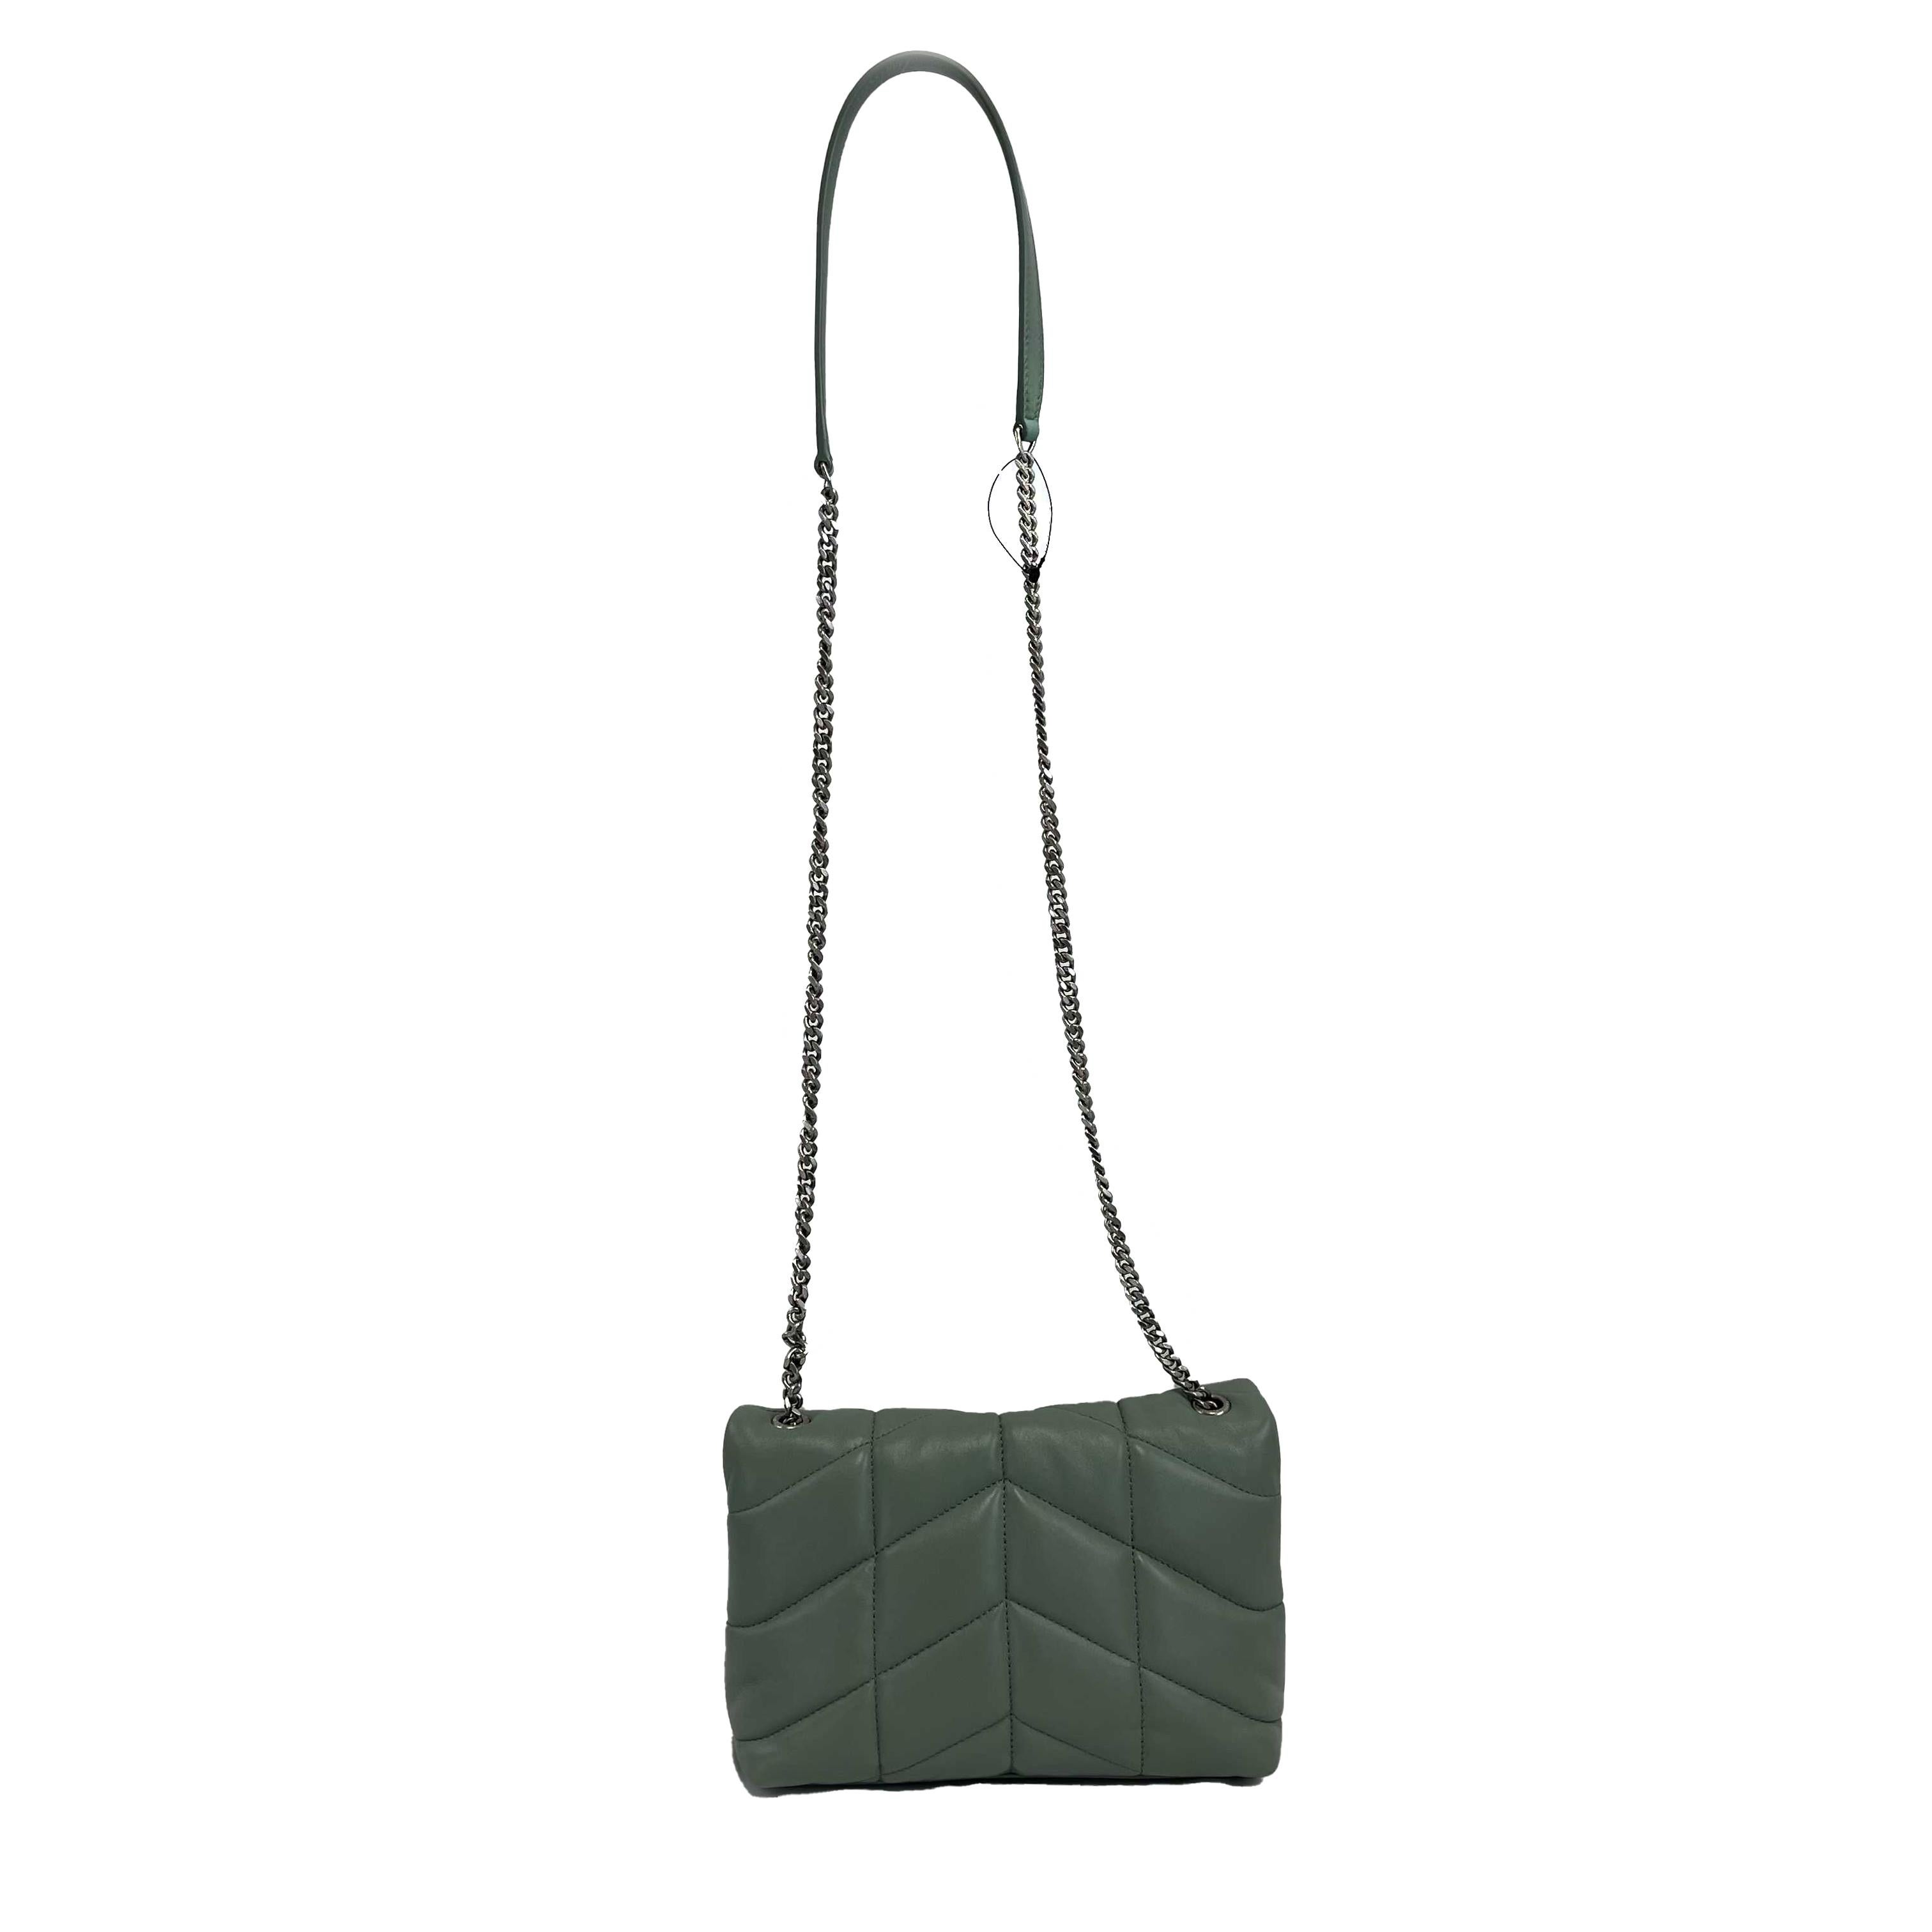 Saint Laurent - Puffer Mint Quilted Leather Mint Green / Silver Toy Crossbody

Description

Saint Laurent's 'Puffer Toy' shoulder bag in green is crafted from lambskin leather and finished with a signature YSL logo. The interior offers neat storage